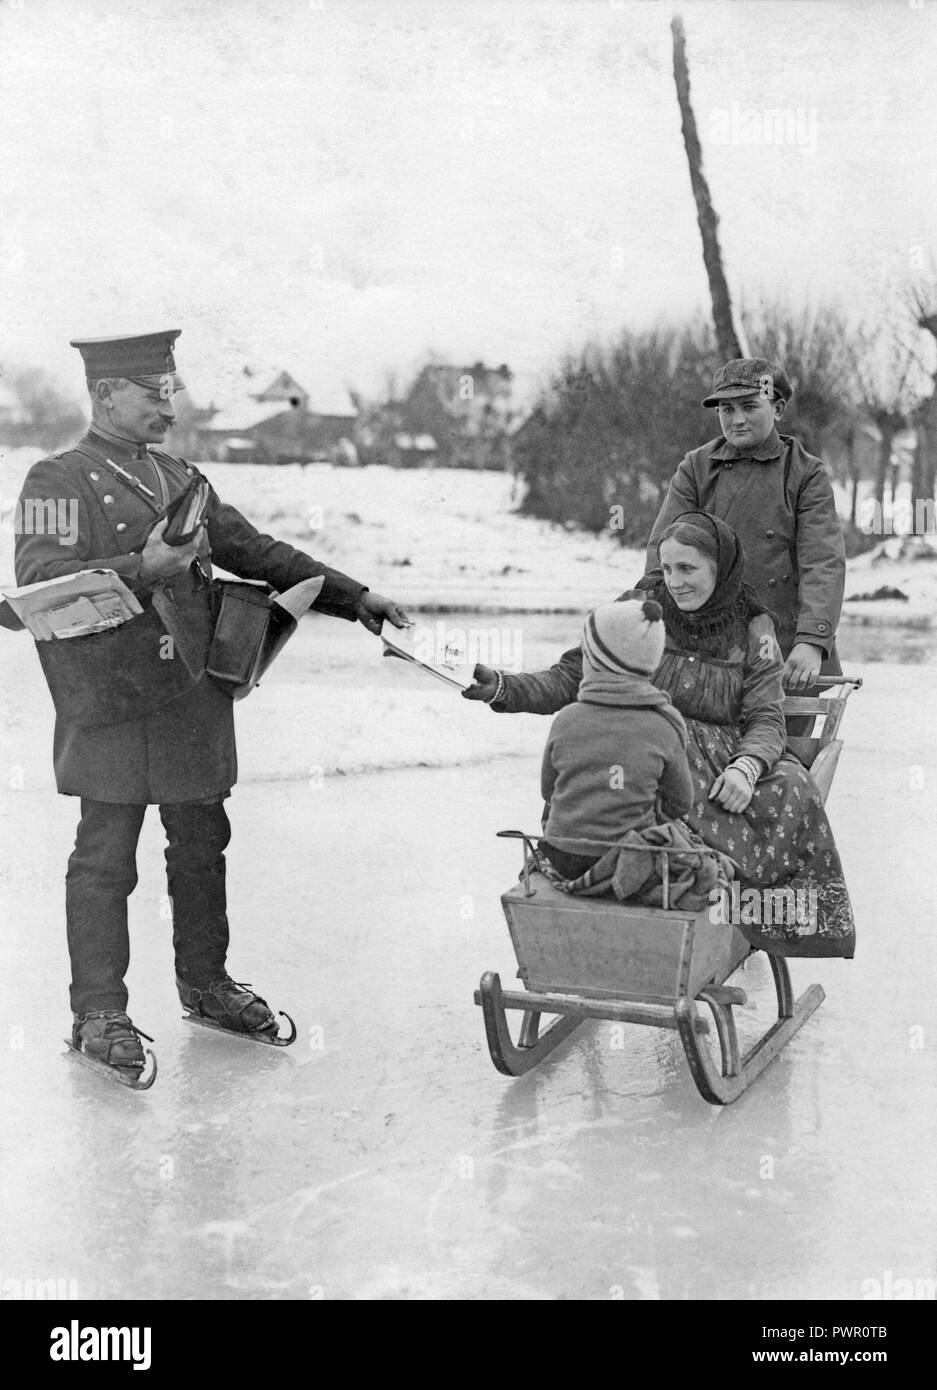 Skating mail man. A properly dressed mailman in uniform is delivering the post when skating on the ice. A woman sitting in a sledge reaches for her post. 1930s. Stock Photo